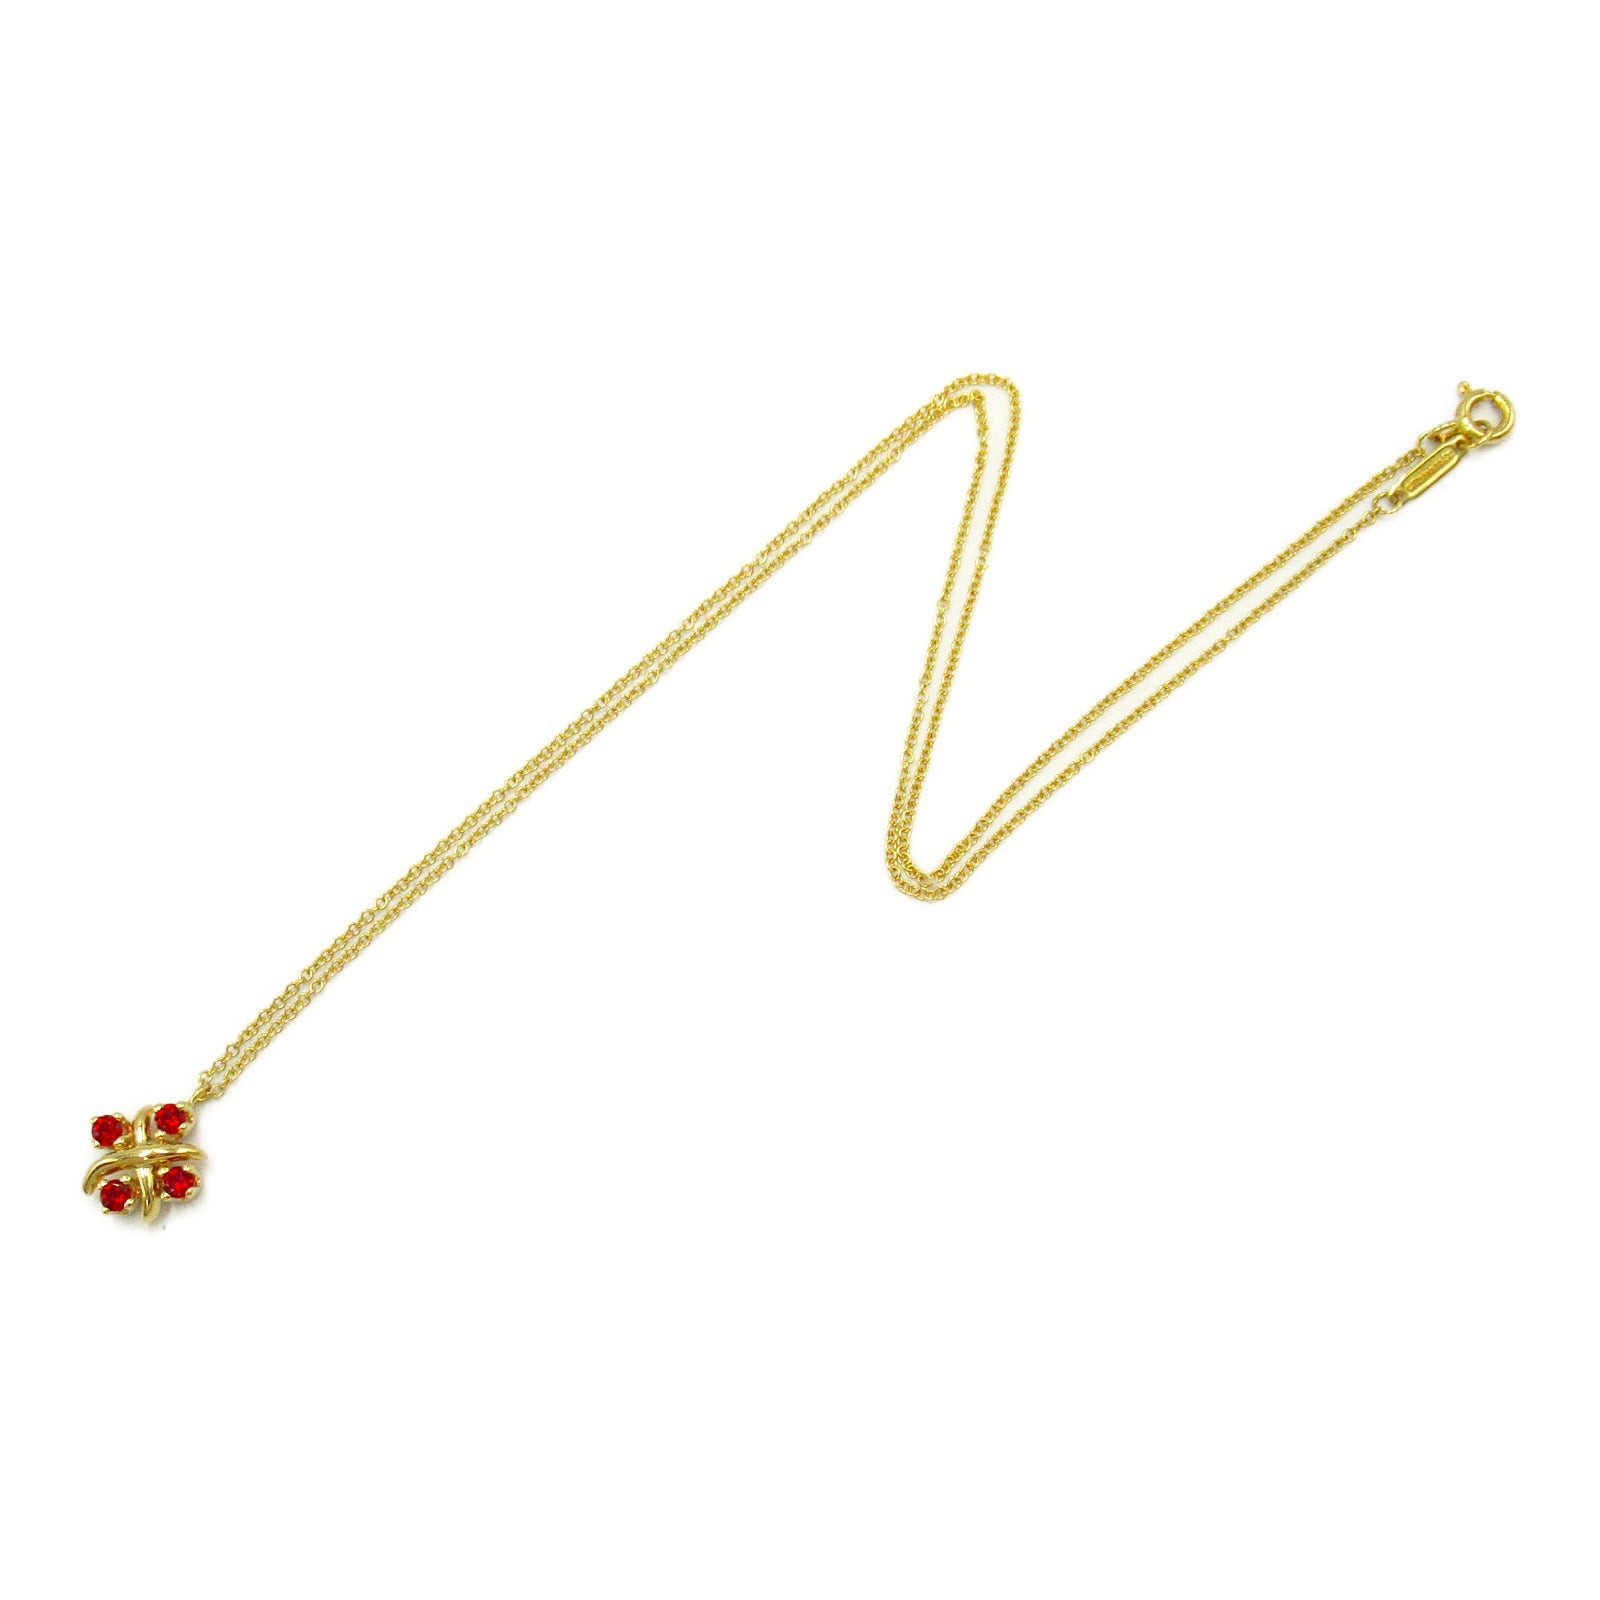 Tiffany TIFFANY&amp;CO Jean Schlumberger Lin ru necklace necklace jewelry K18 (yellow g) ruby ladies red